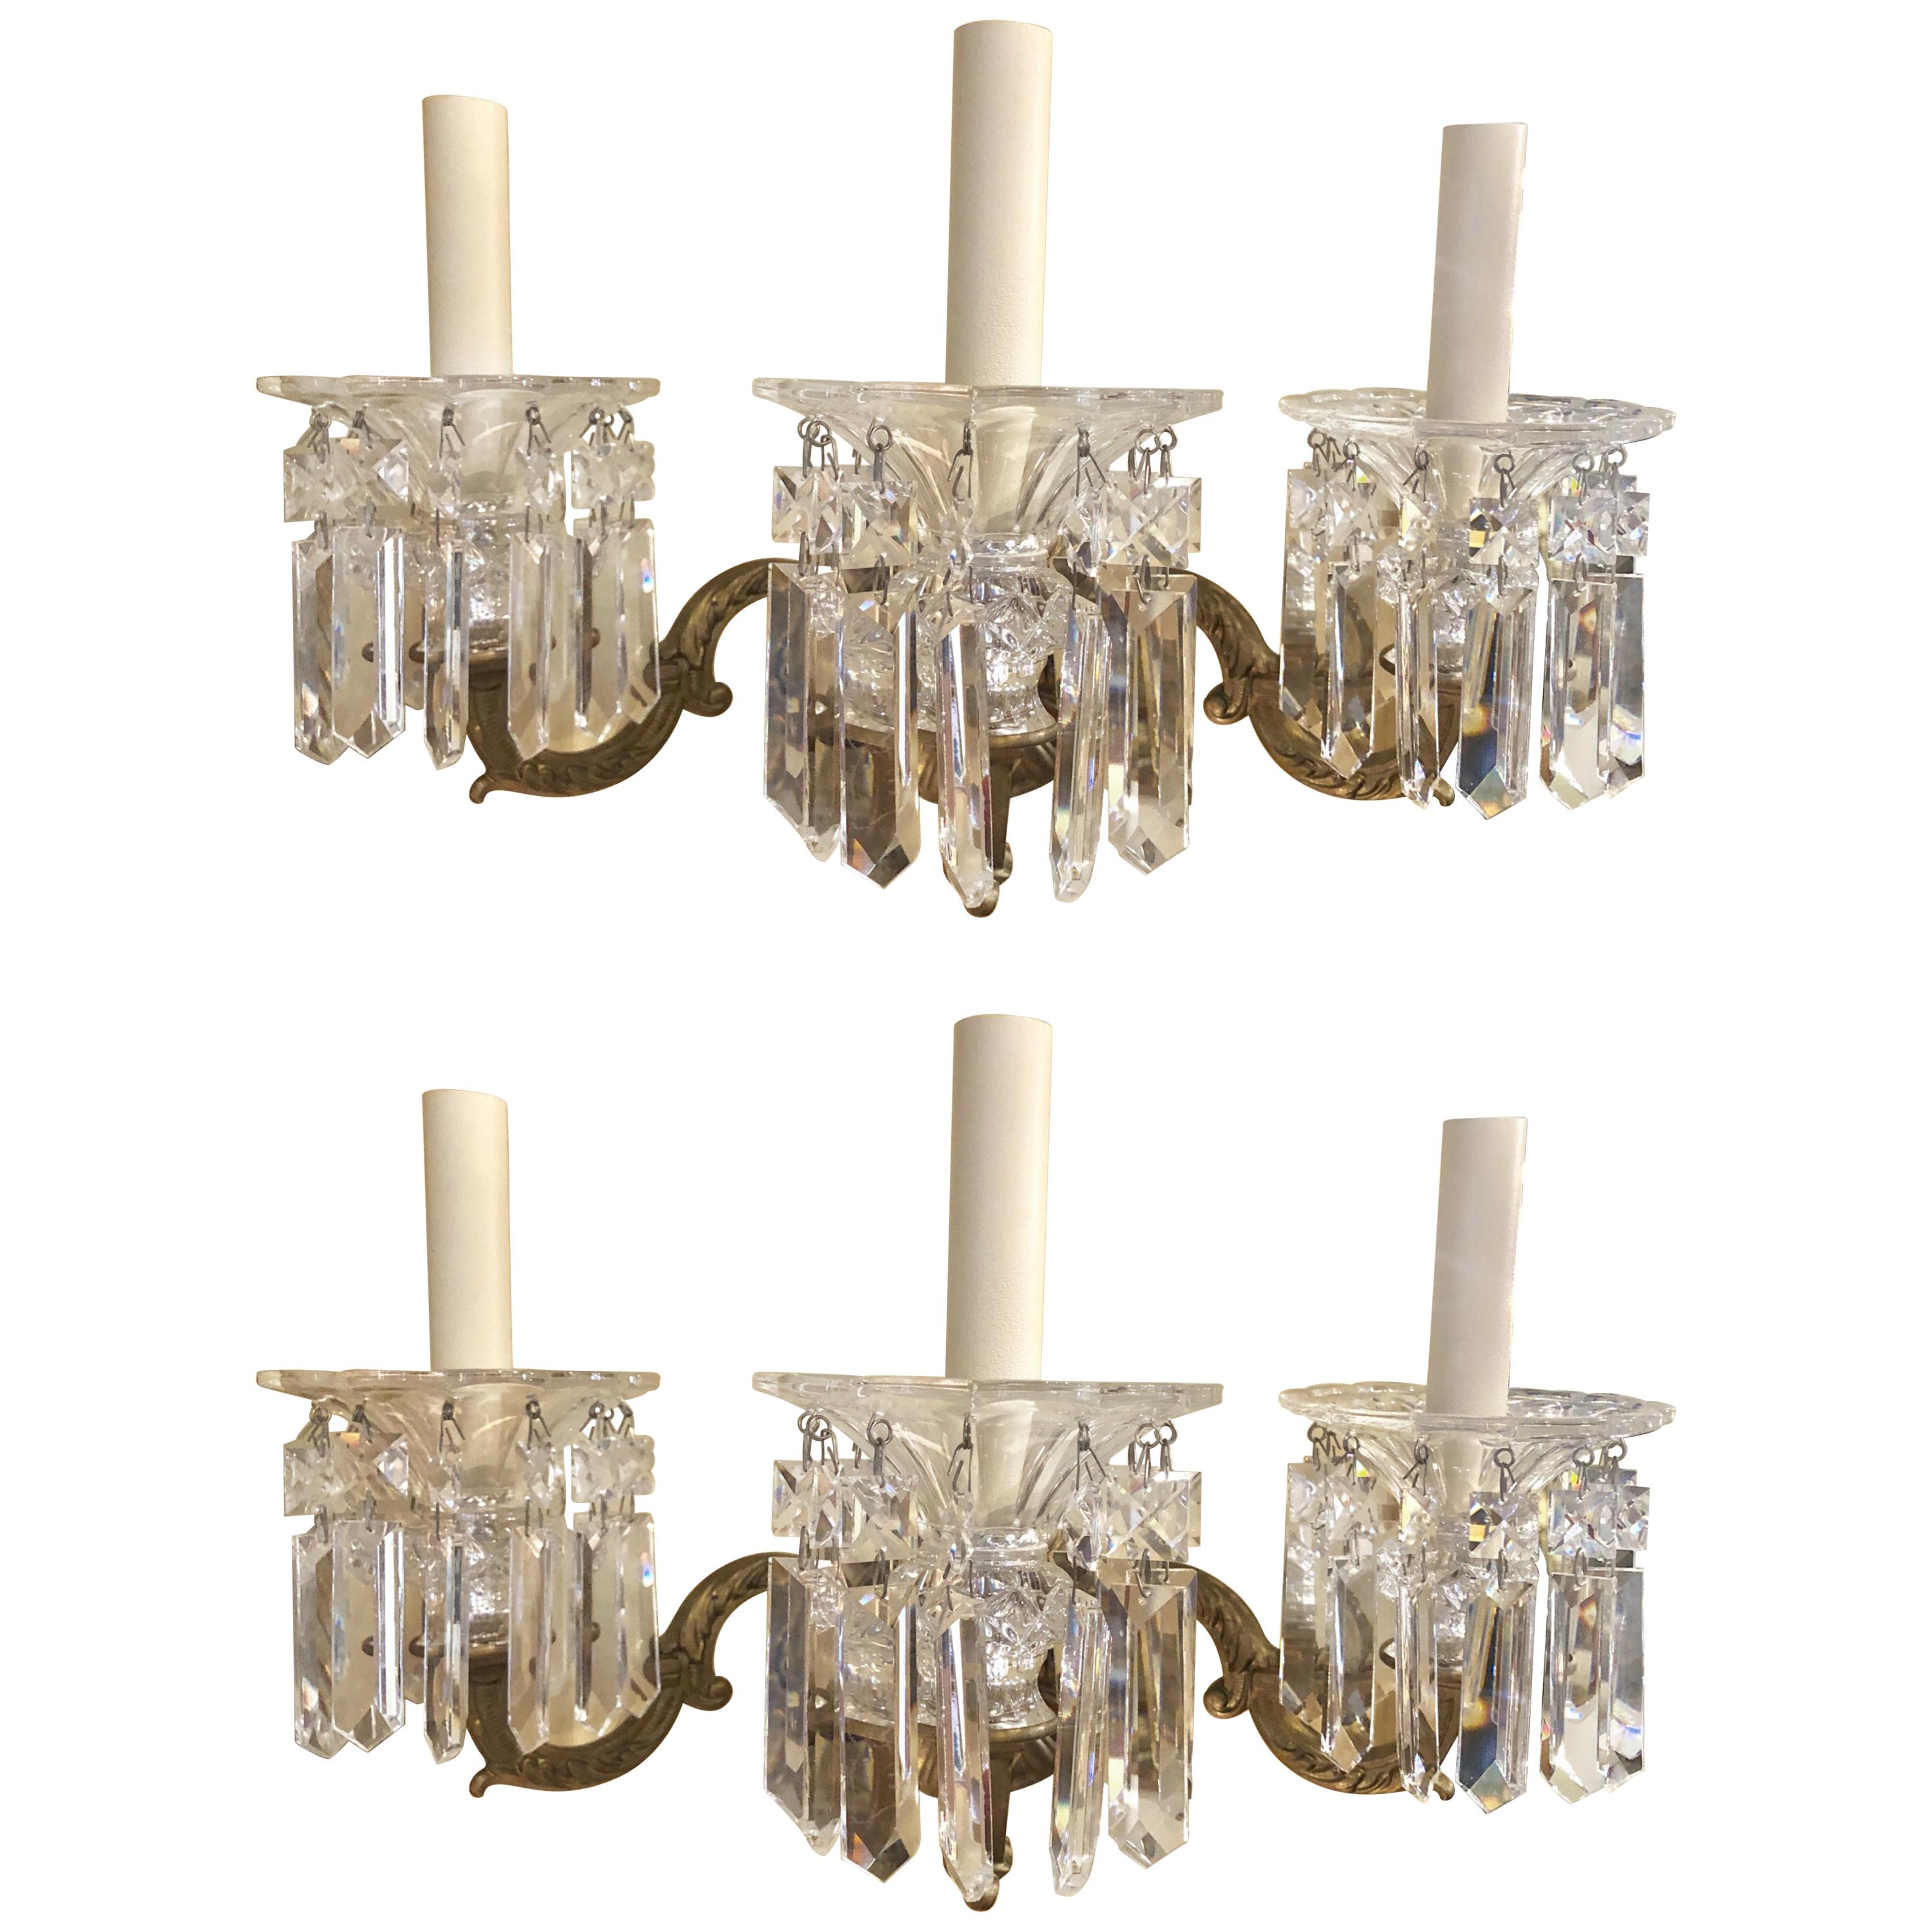 Pair of Three-Light Solid Brass Sconces Hand Cut Crystals by Schonbek